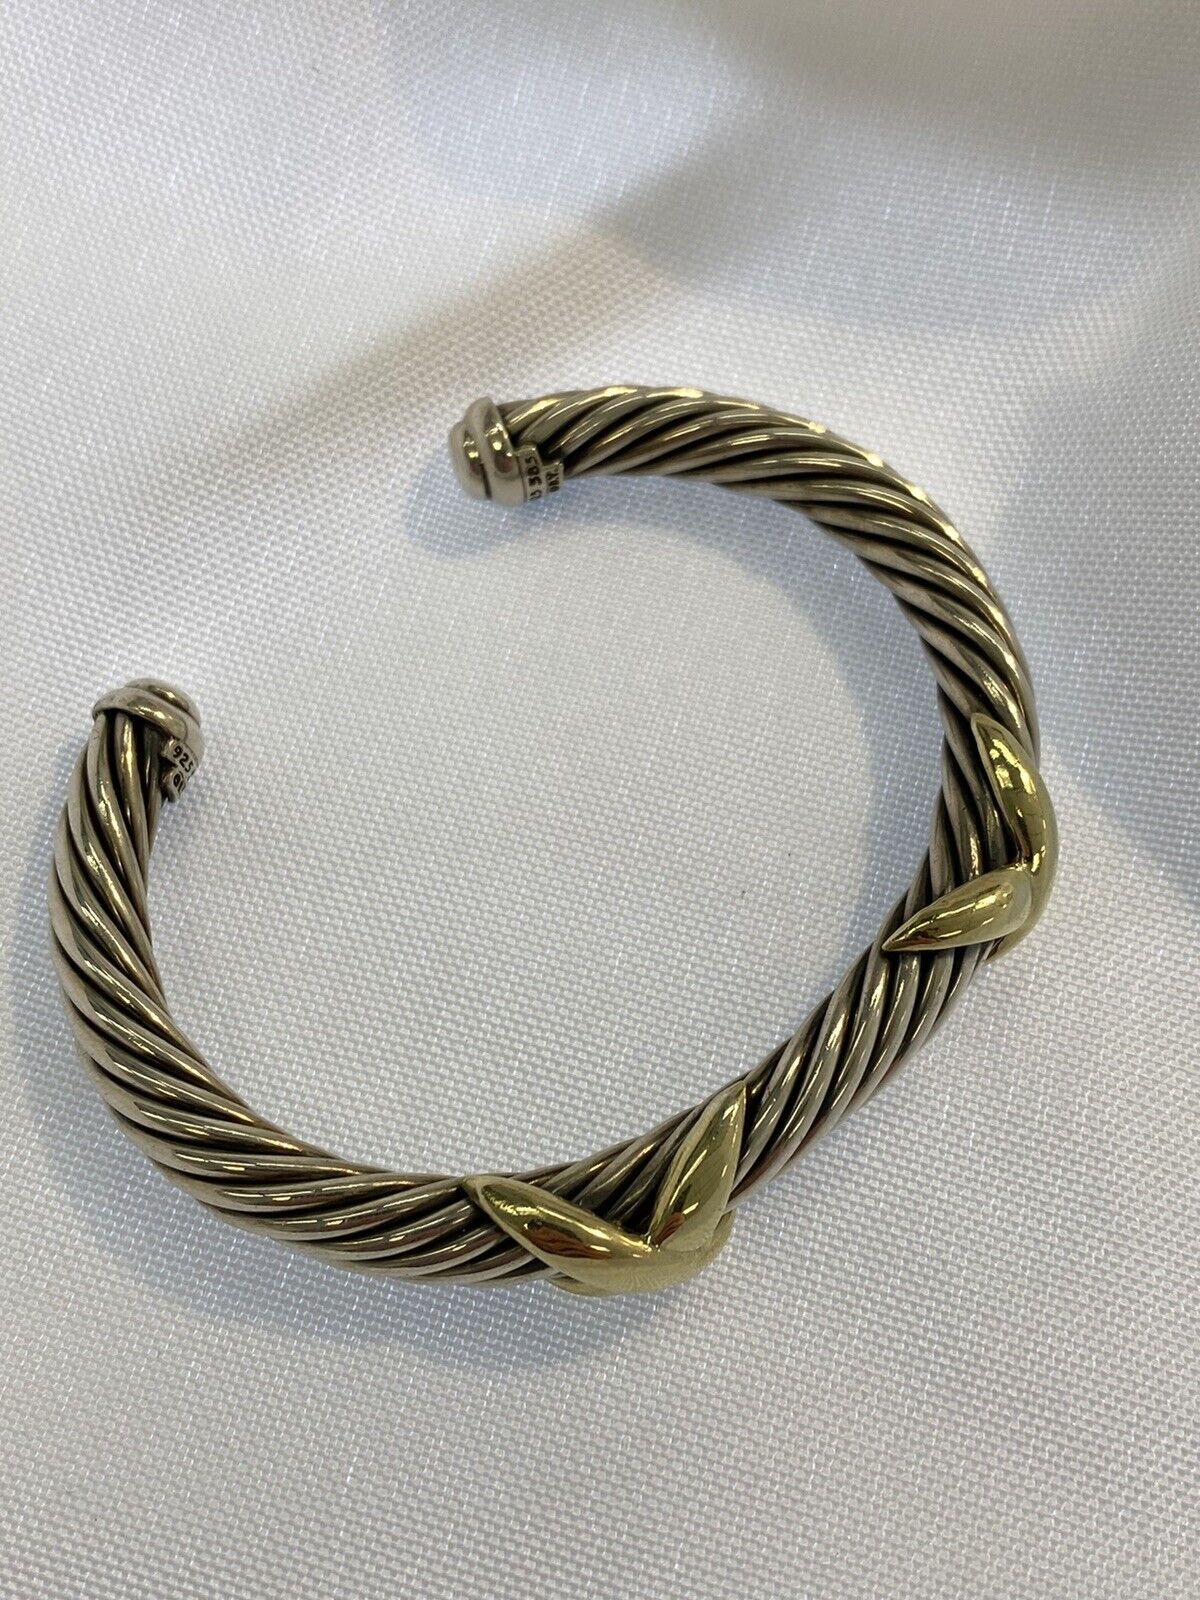 David Yurman Double X Cable Bangle Bracelet made in Sterling Silver and 14-Karat Yellow Gold